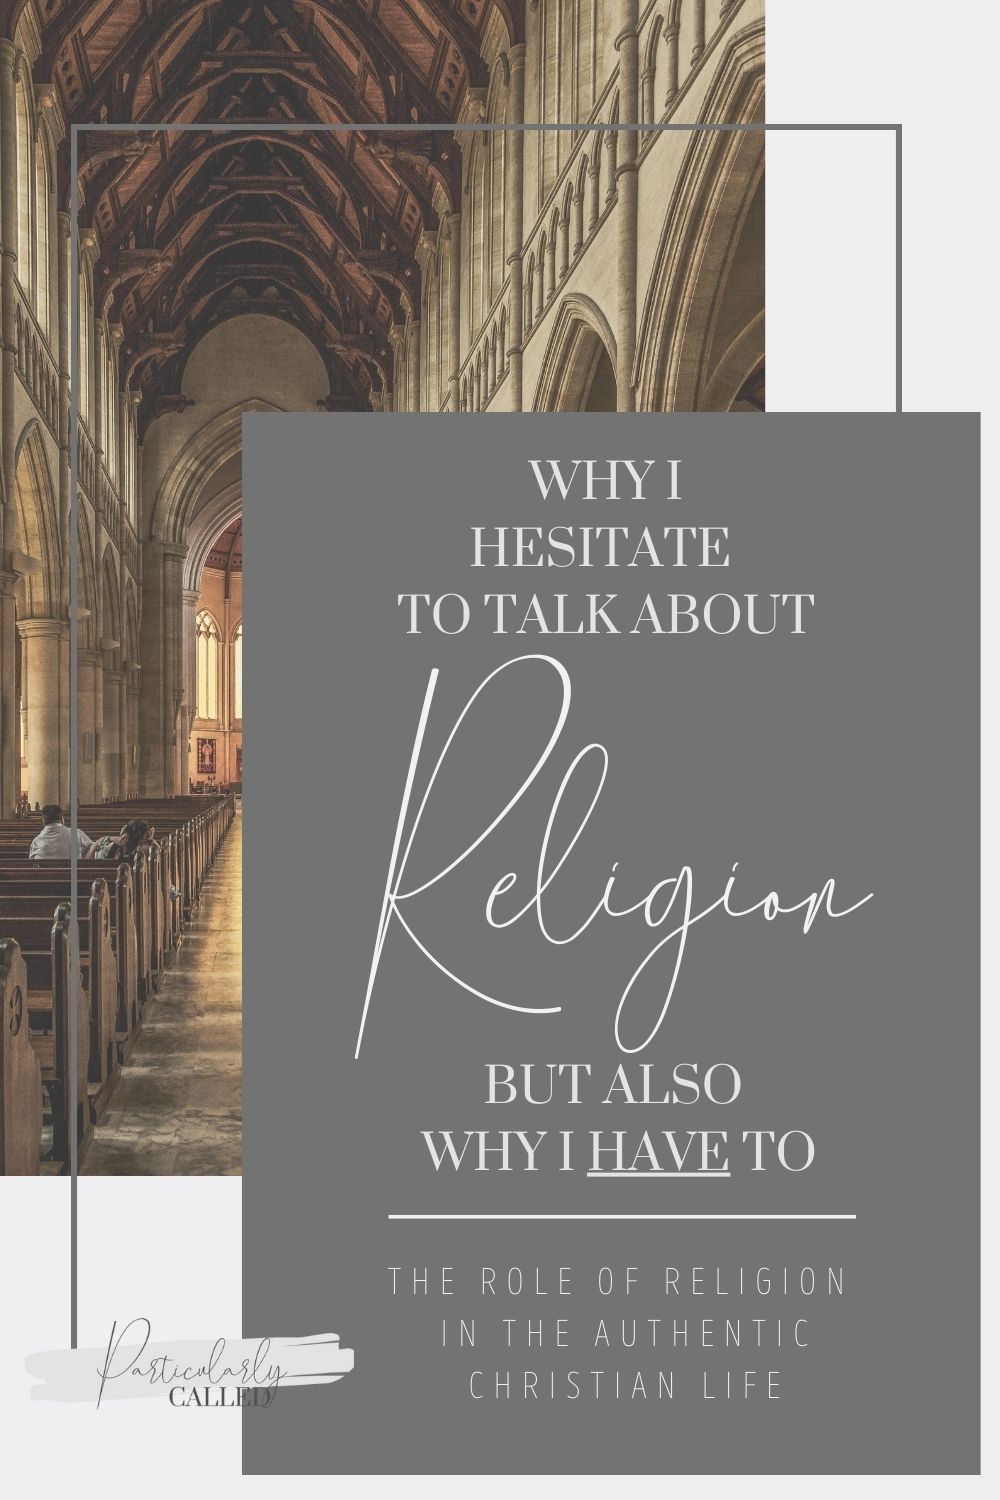 role-of-religion-authentic-christian-life